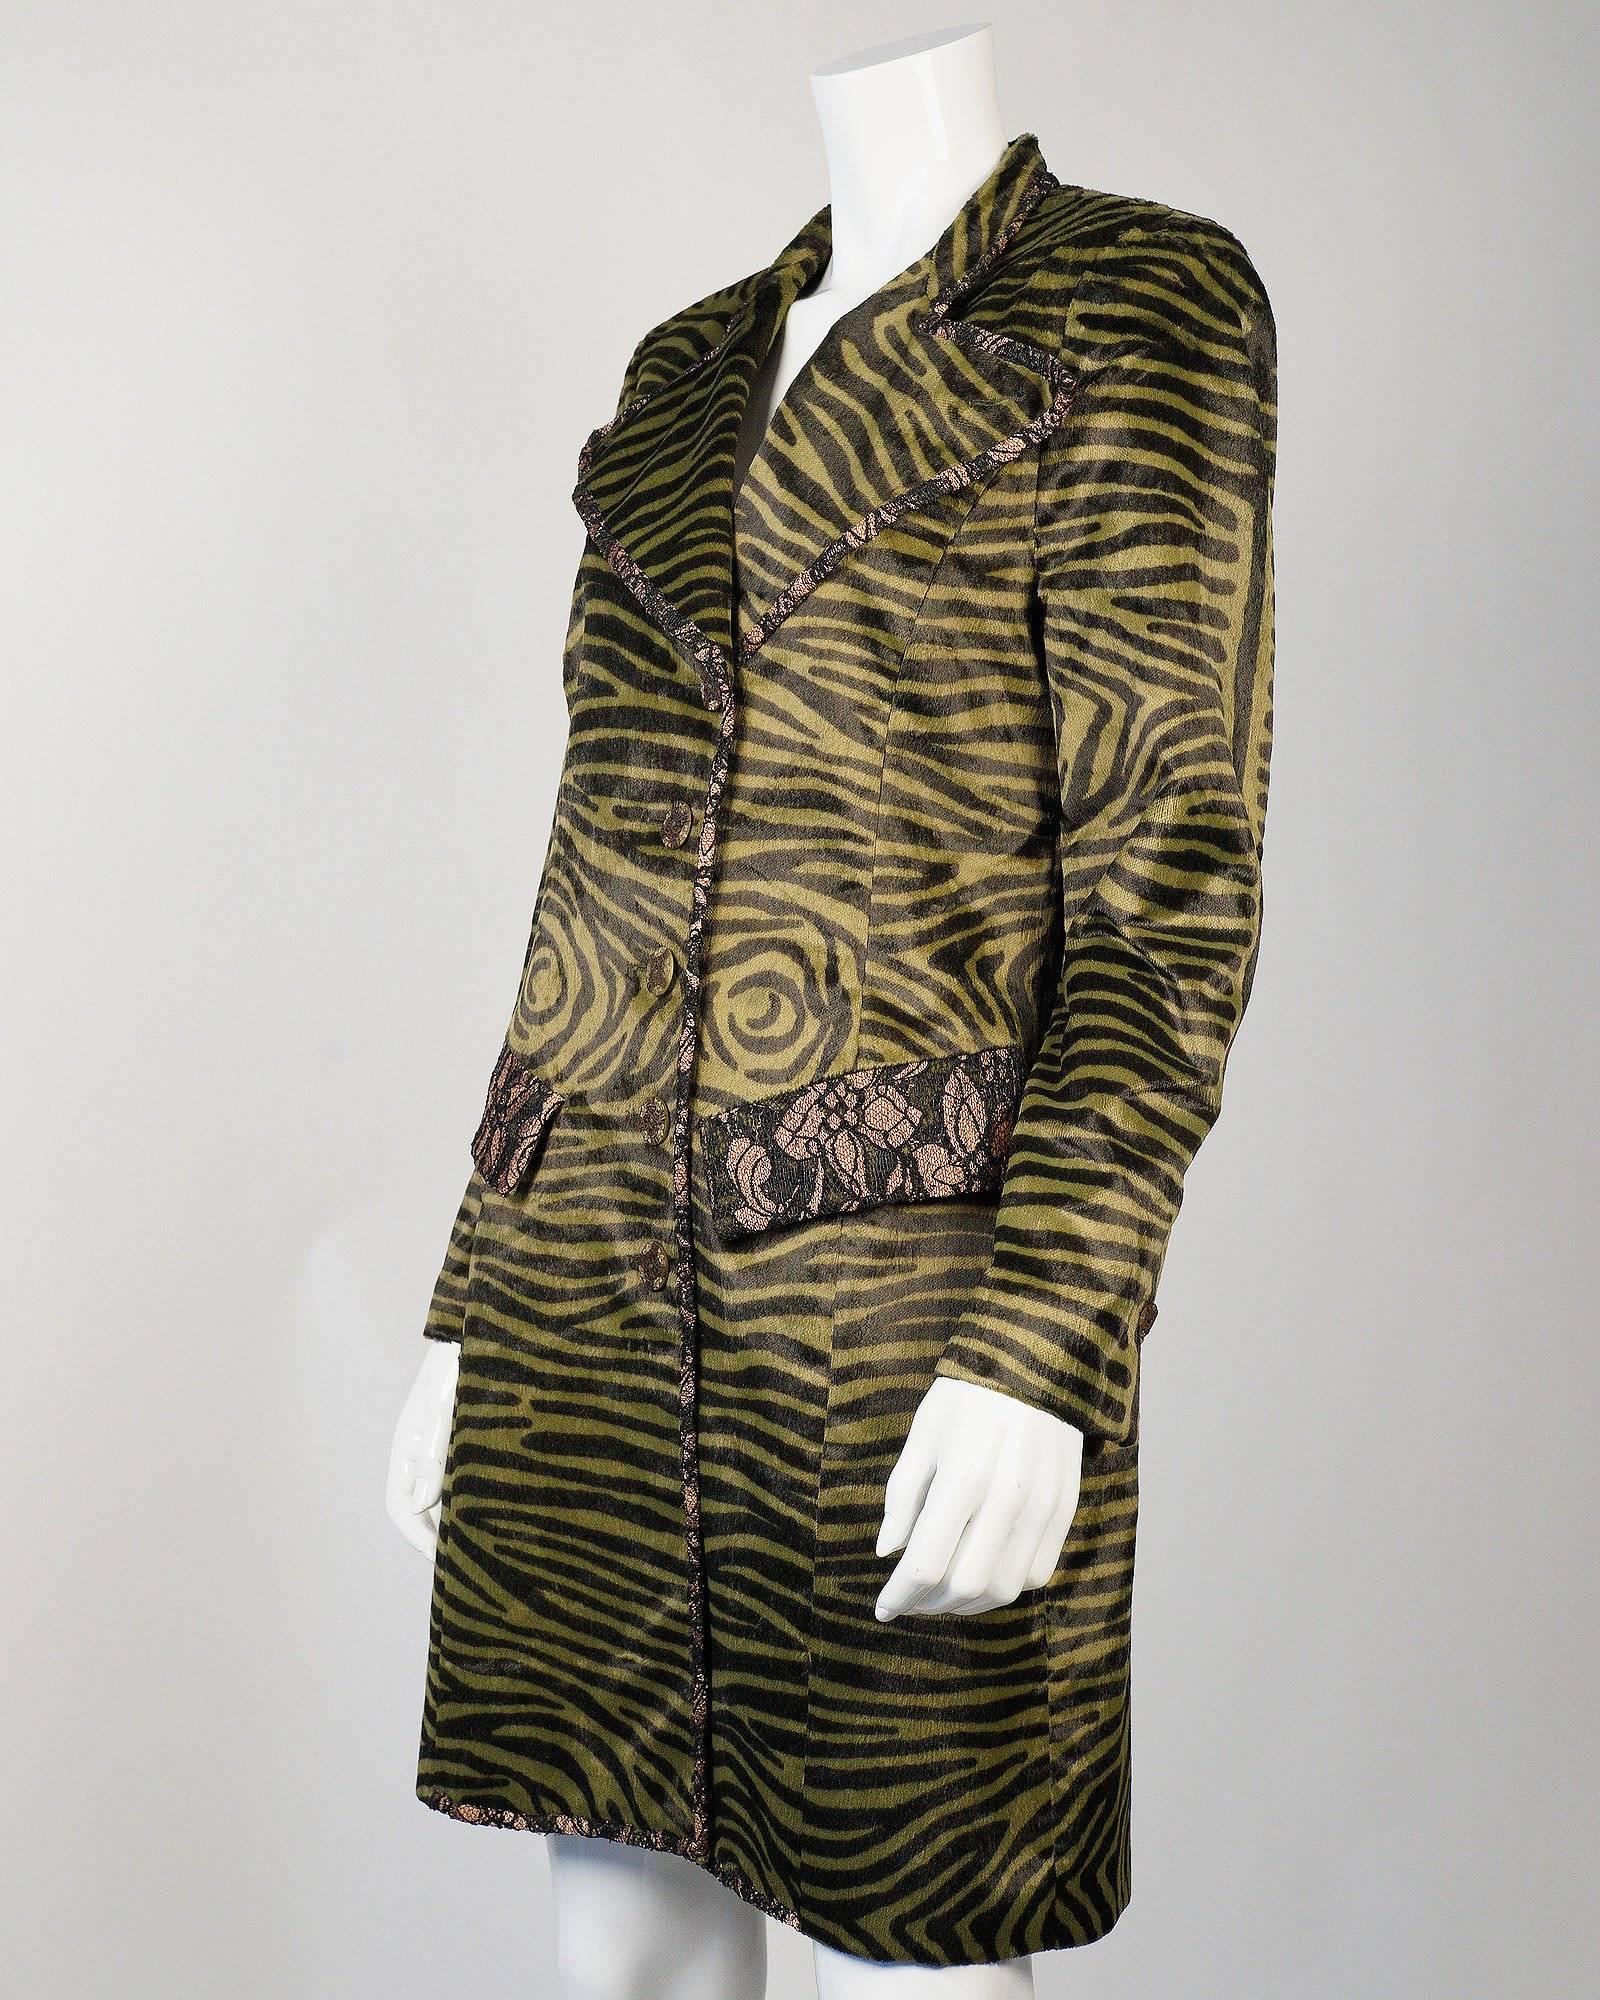 Christian Lacroix for Bazar Tiger print coat with fantastic wide lapels with black lace trim along the pockets and lapel. 

Made in France
Size: 44
Measurements: 
36 inches long top to bottom
24 inch sleeve length

Good Vintage Condition: Please